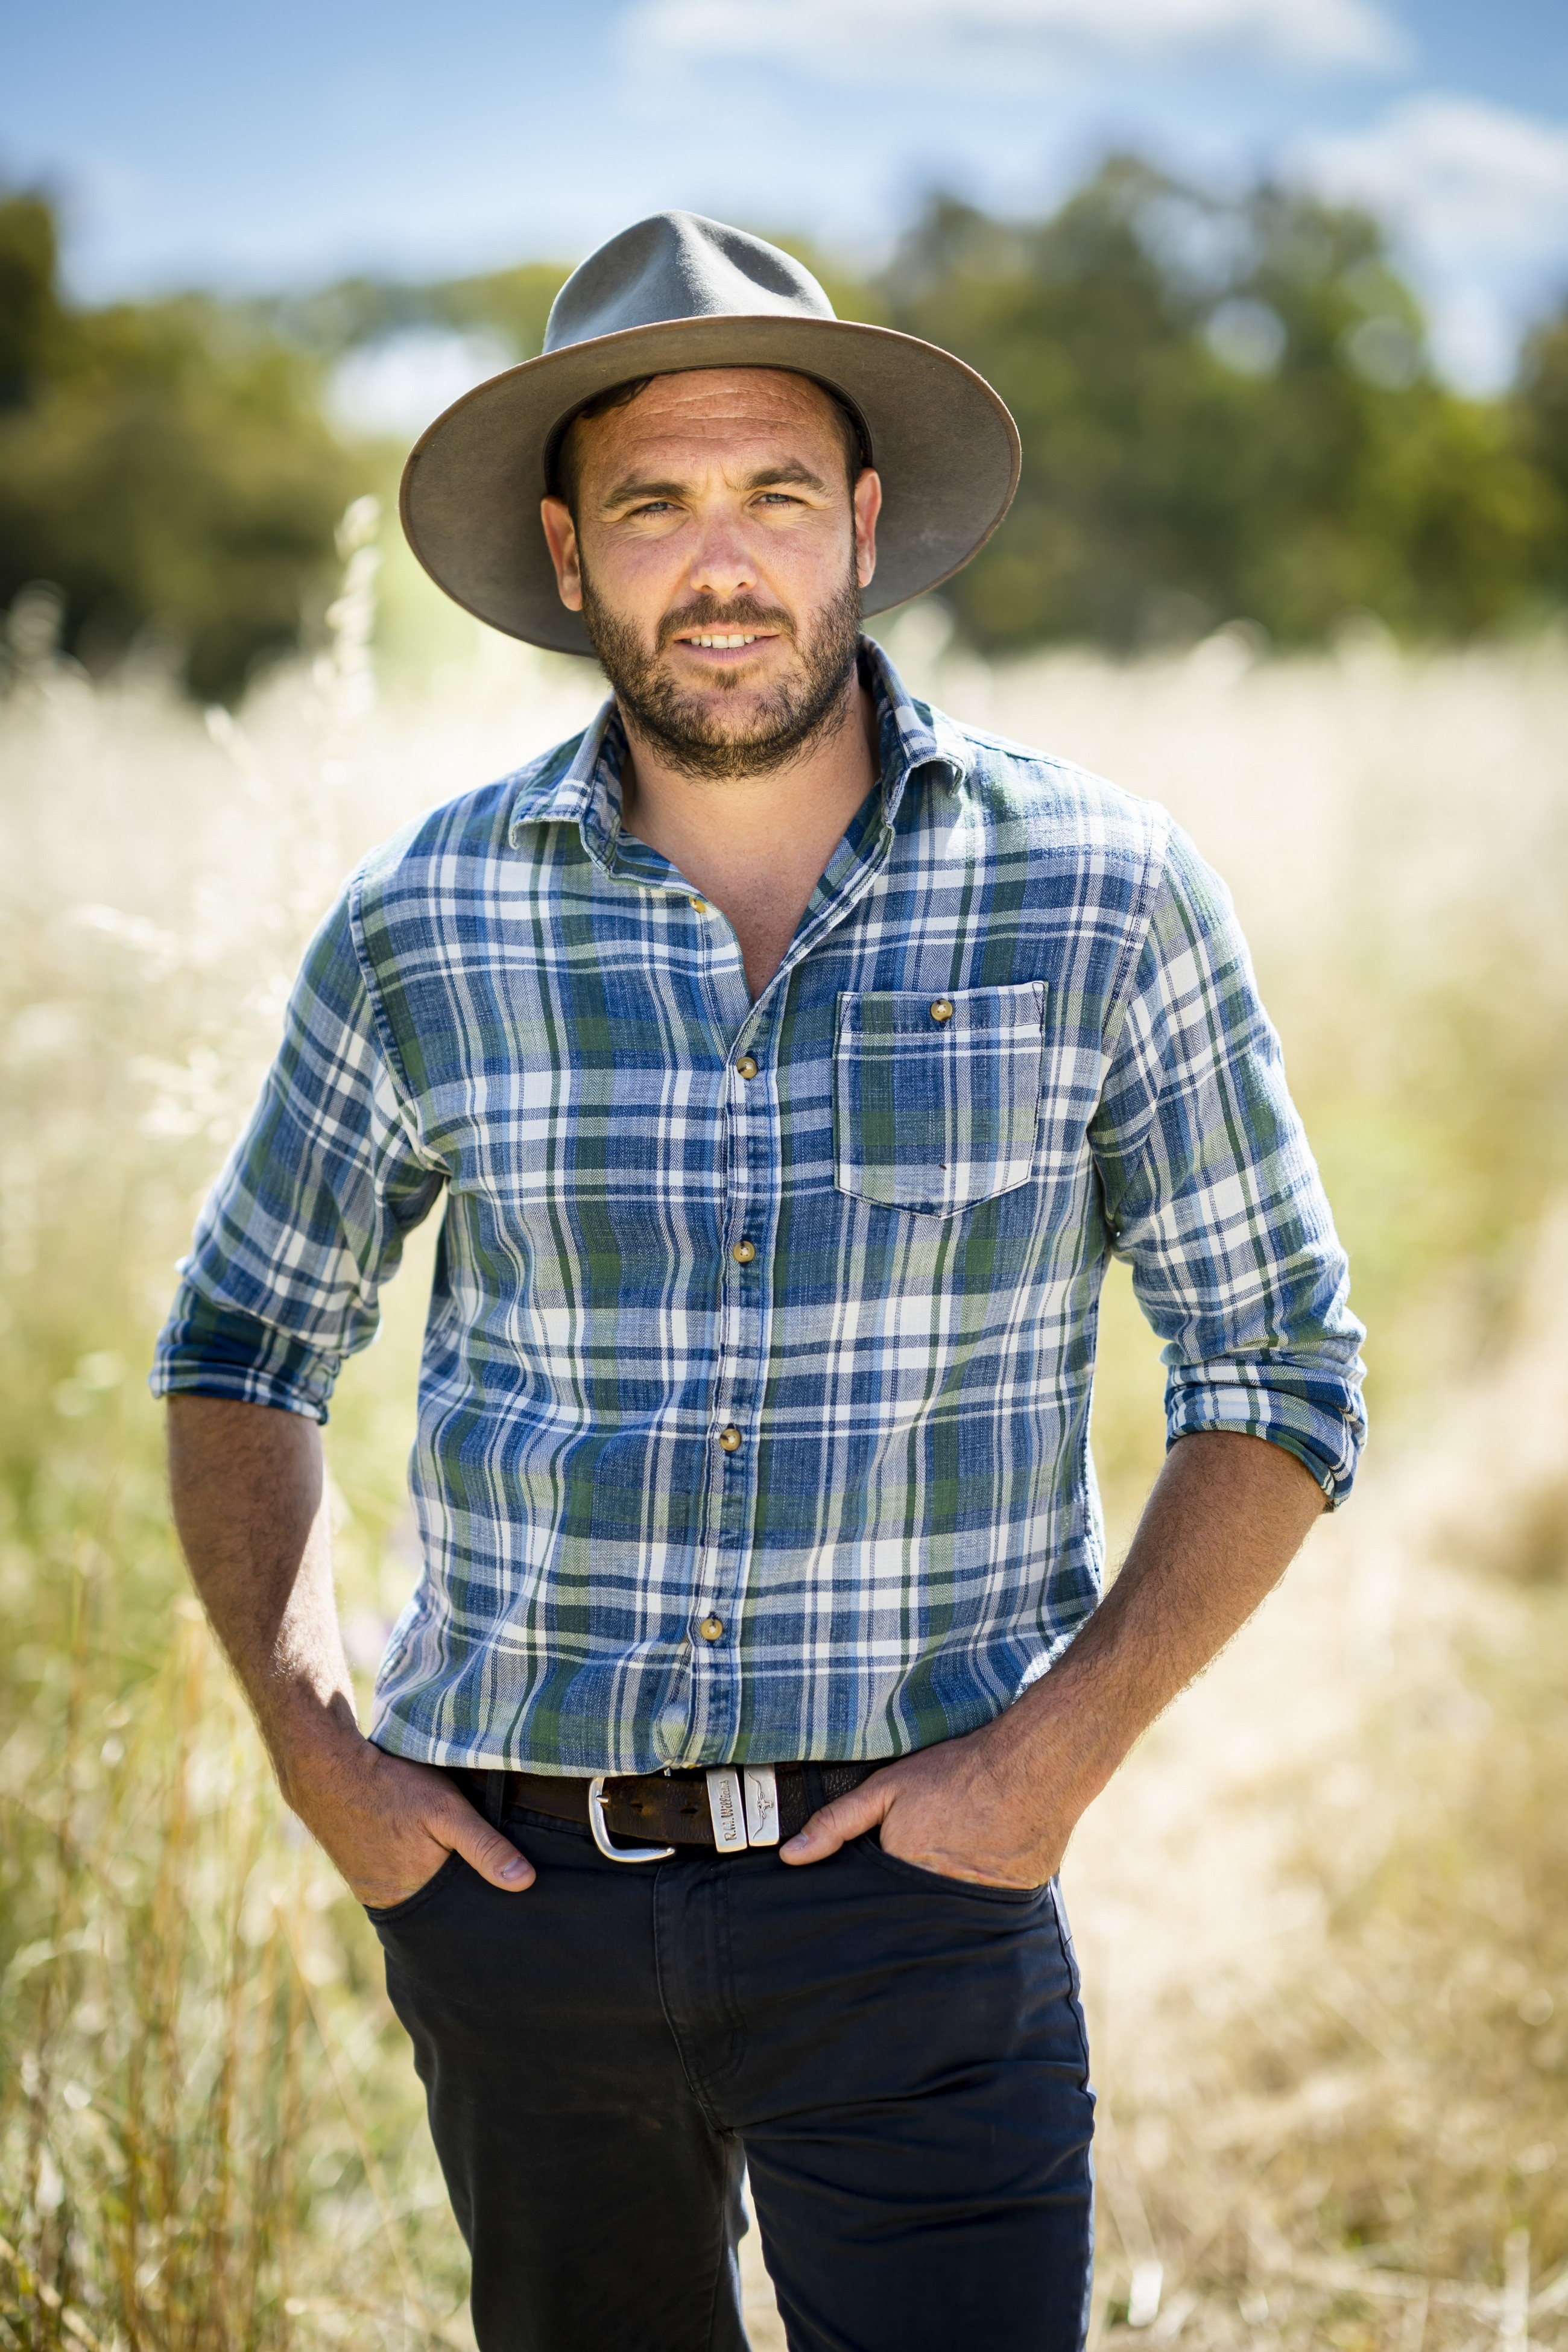 Farmer Wants a Wife: Andrew Guthrie discusses moving in with contestant